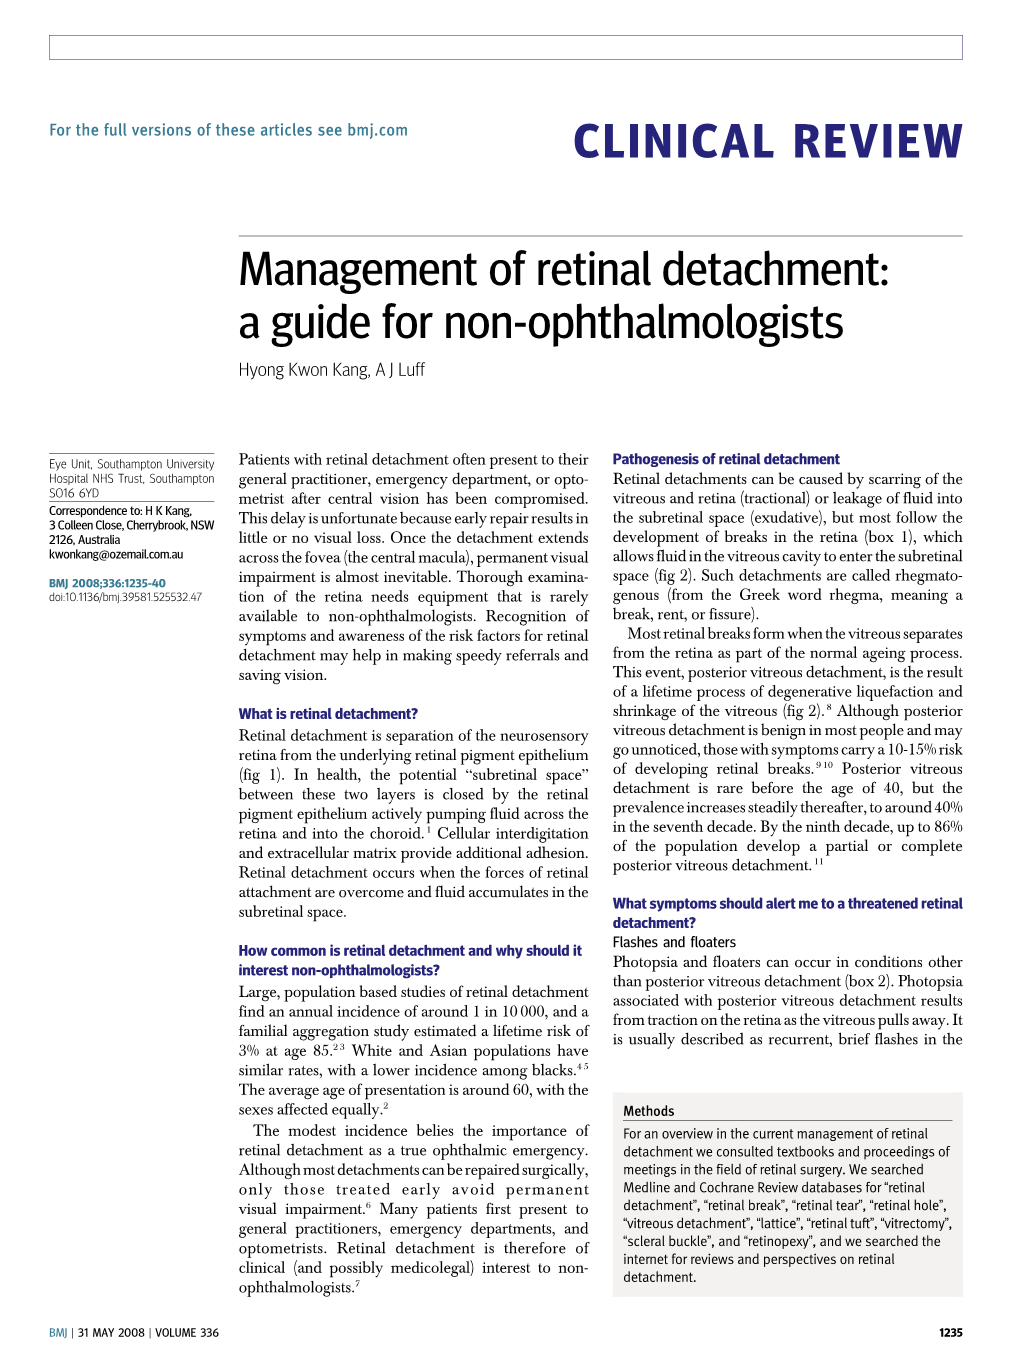 CLINICAL REVIEW Management of Retinal Detachment: a Guide for Non